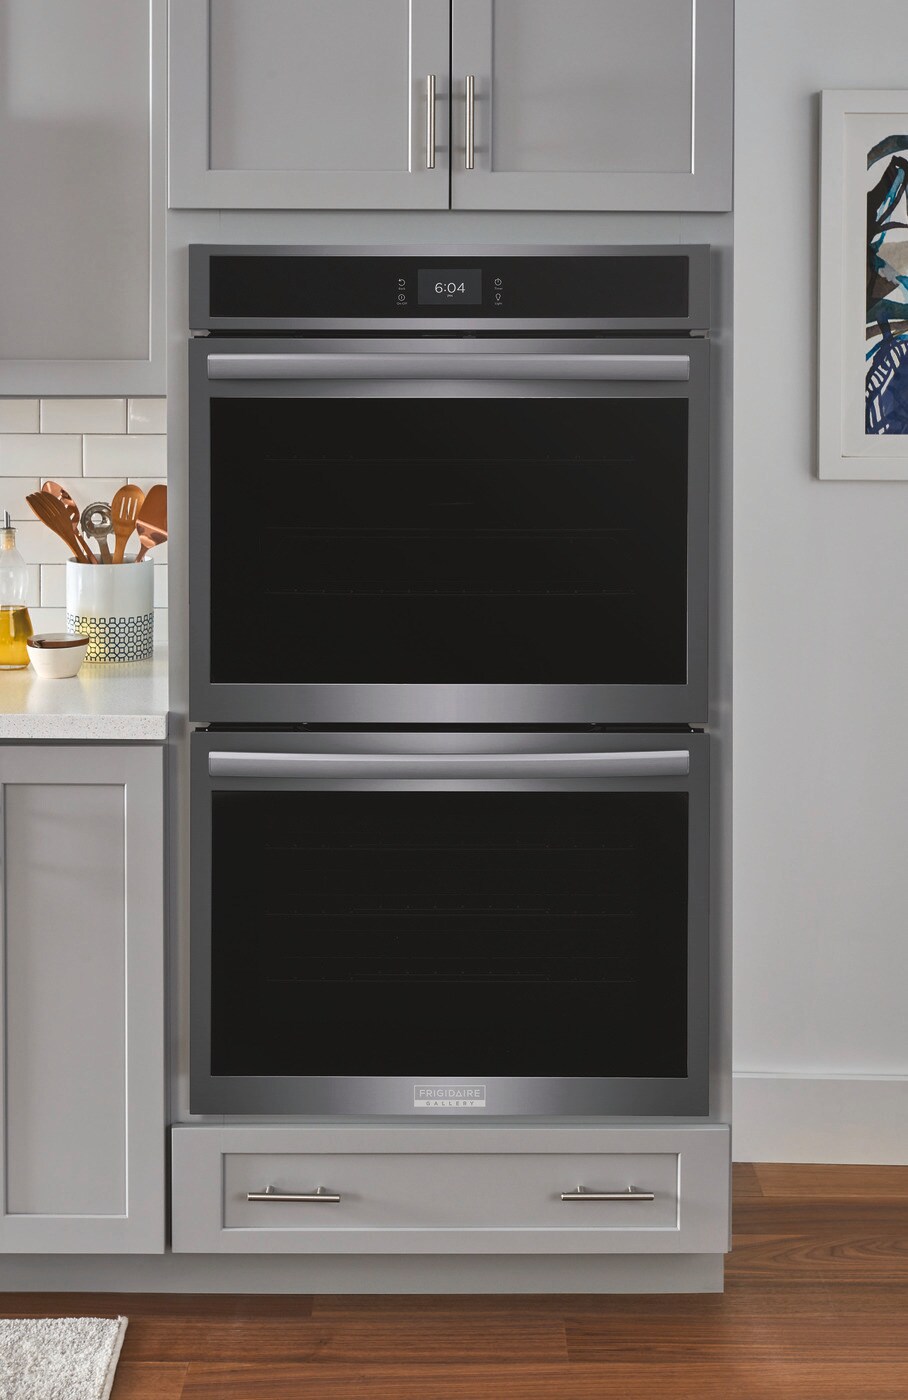 30" Frigidaire Gallery 10.6 Cu. Ft.  Double Electric Wall Oven with Total Convection - GCWD3067AD